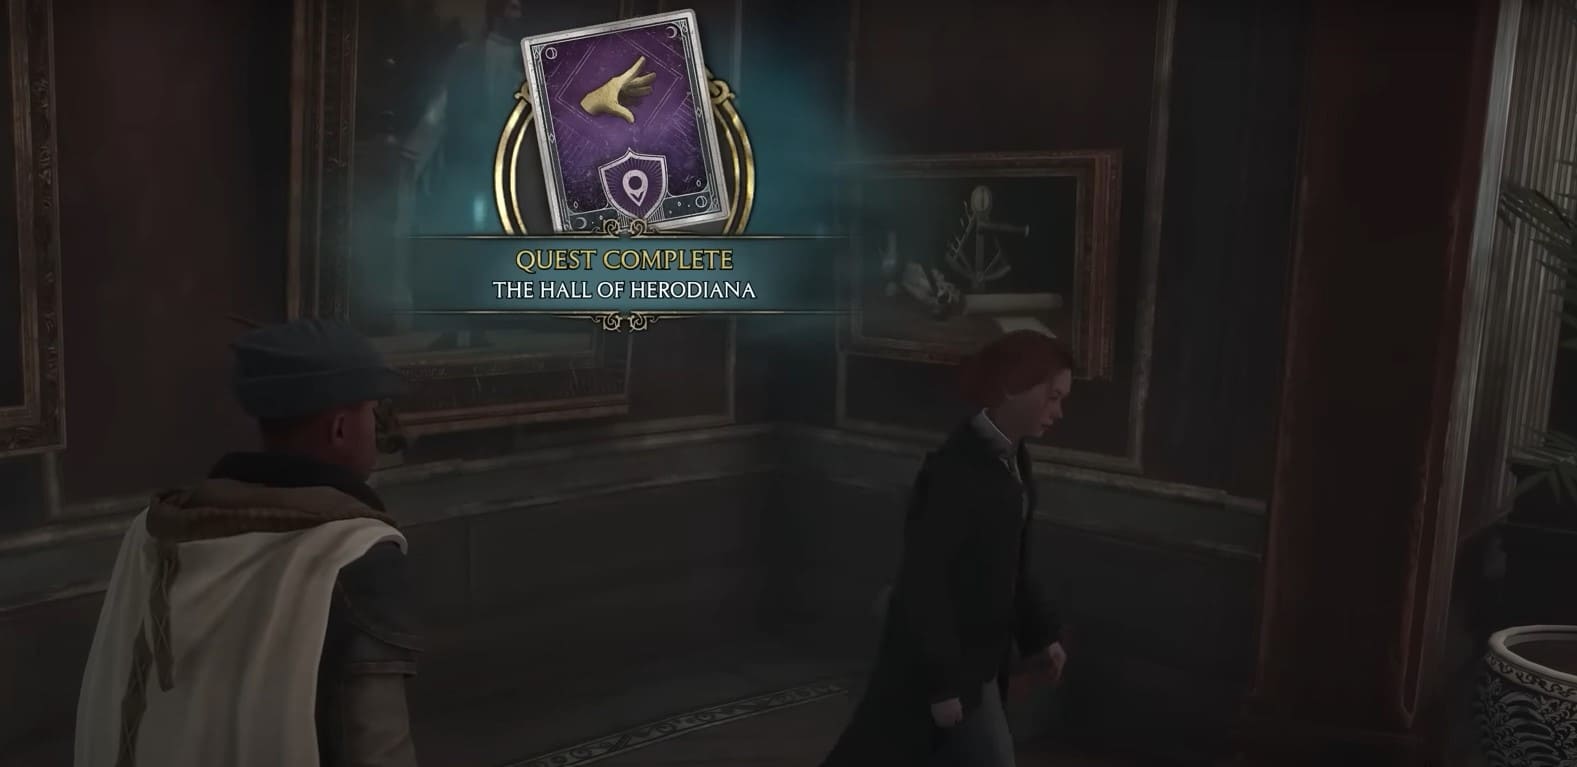 How to Solve All Herodiana Puzzles in Hogwarts Legacy - The Hall of Herodiana